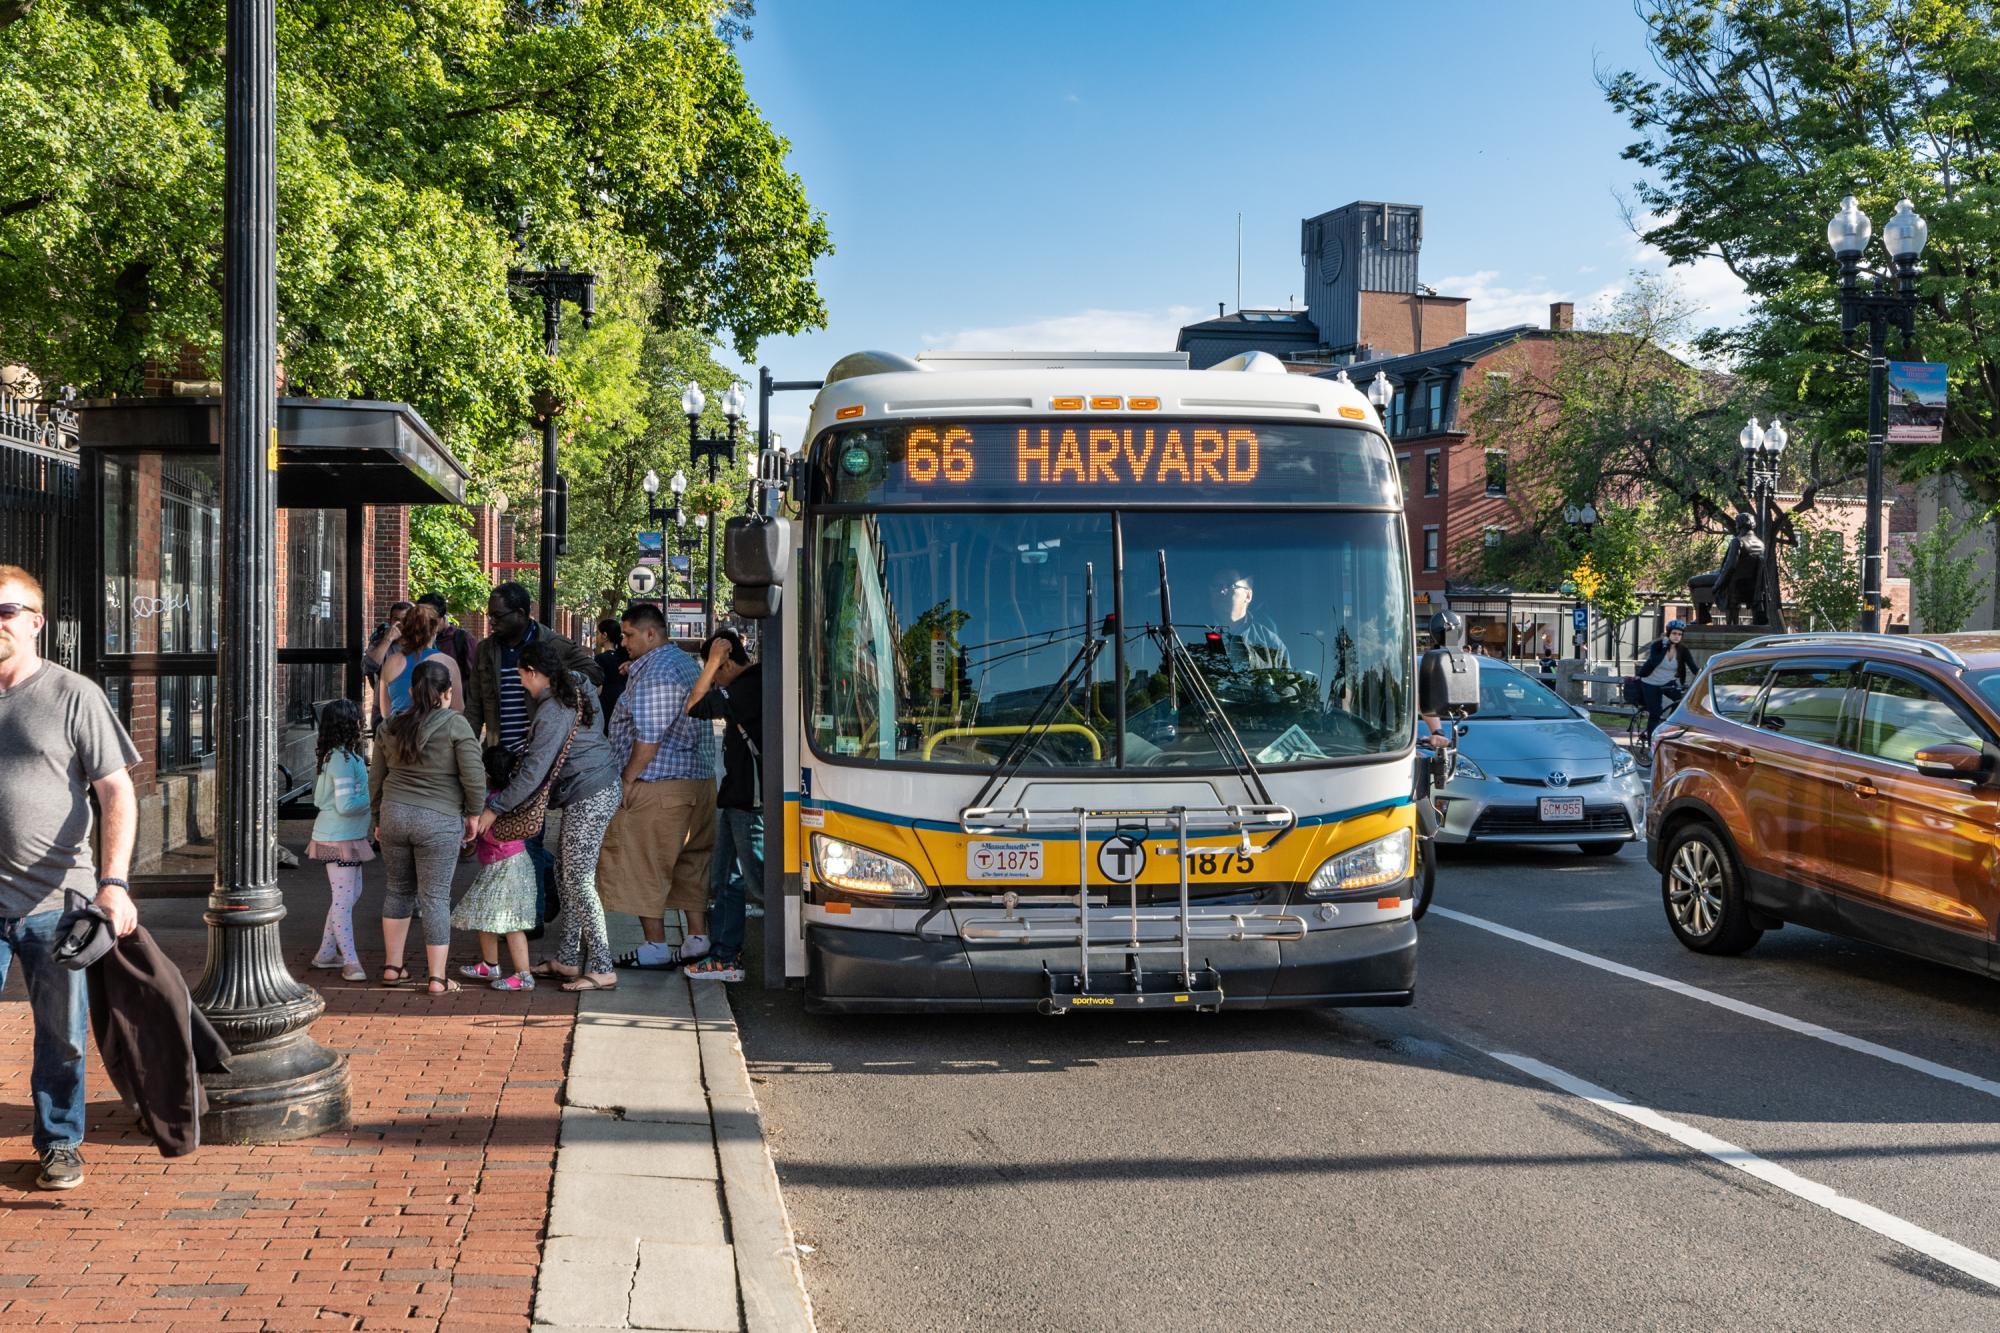 Riders exit a Route 66 bus in Harvard Square